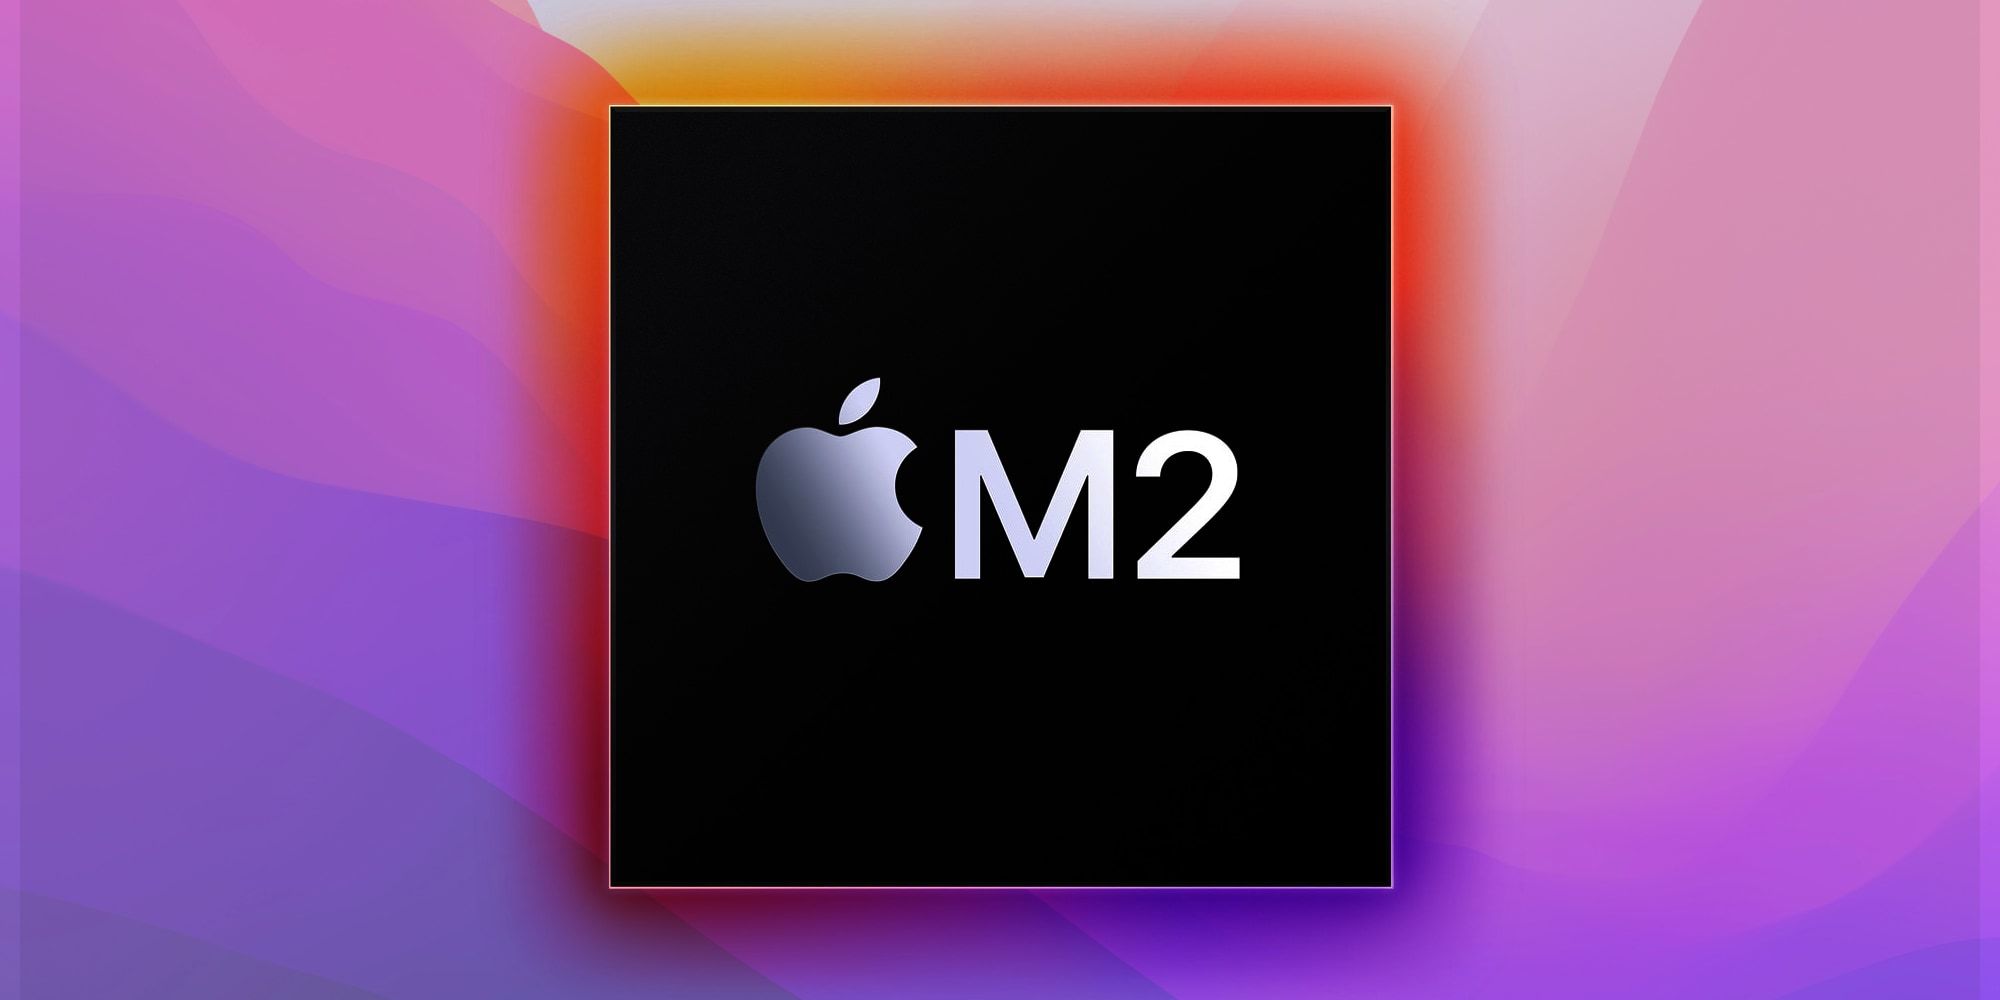 A graphic of the Apple M2 Processor Chip